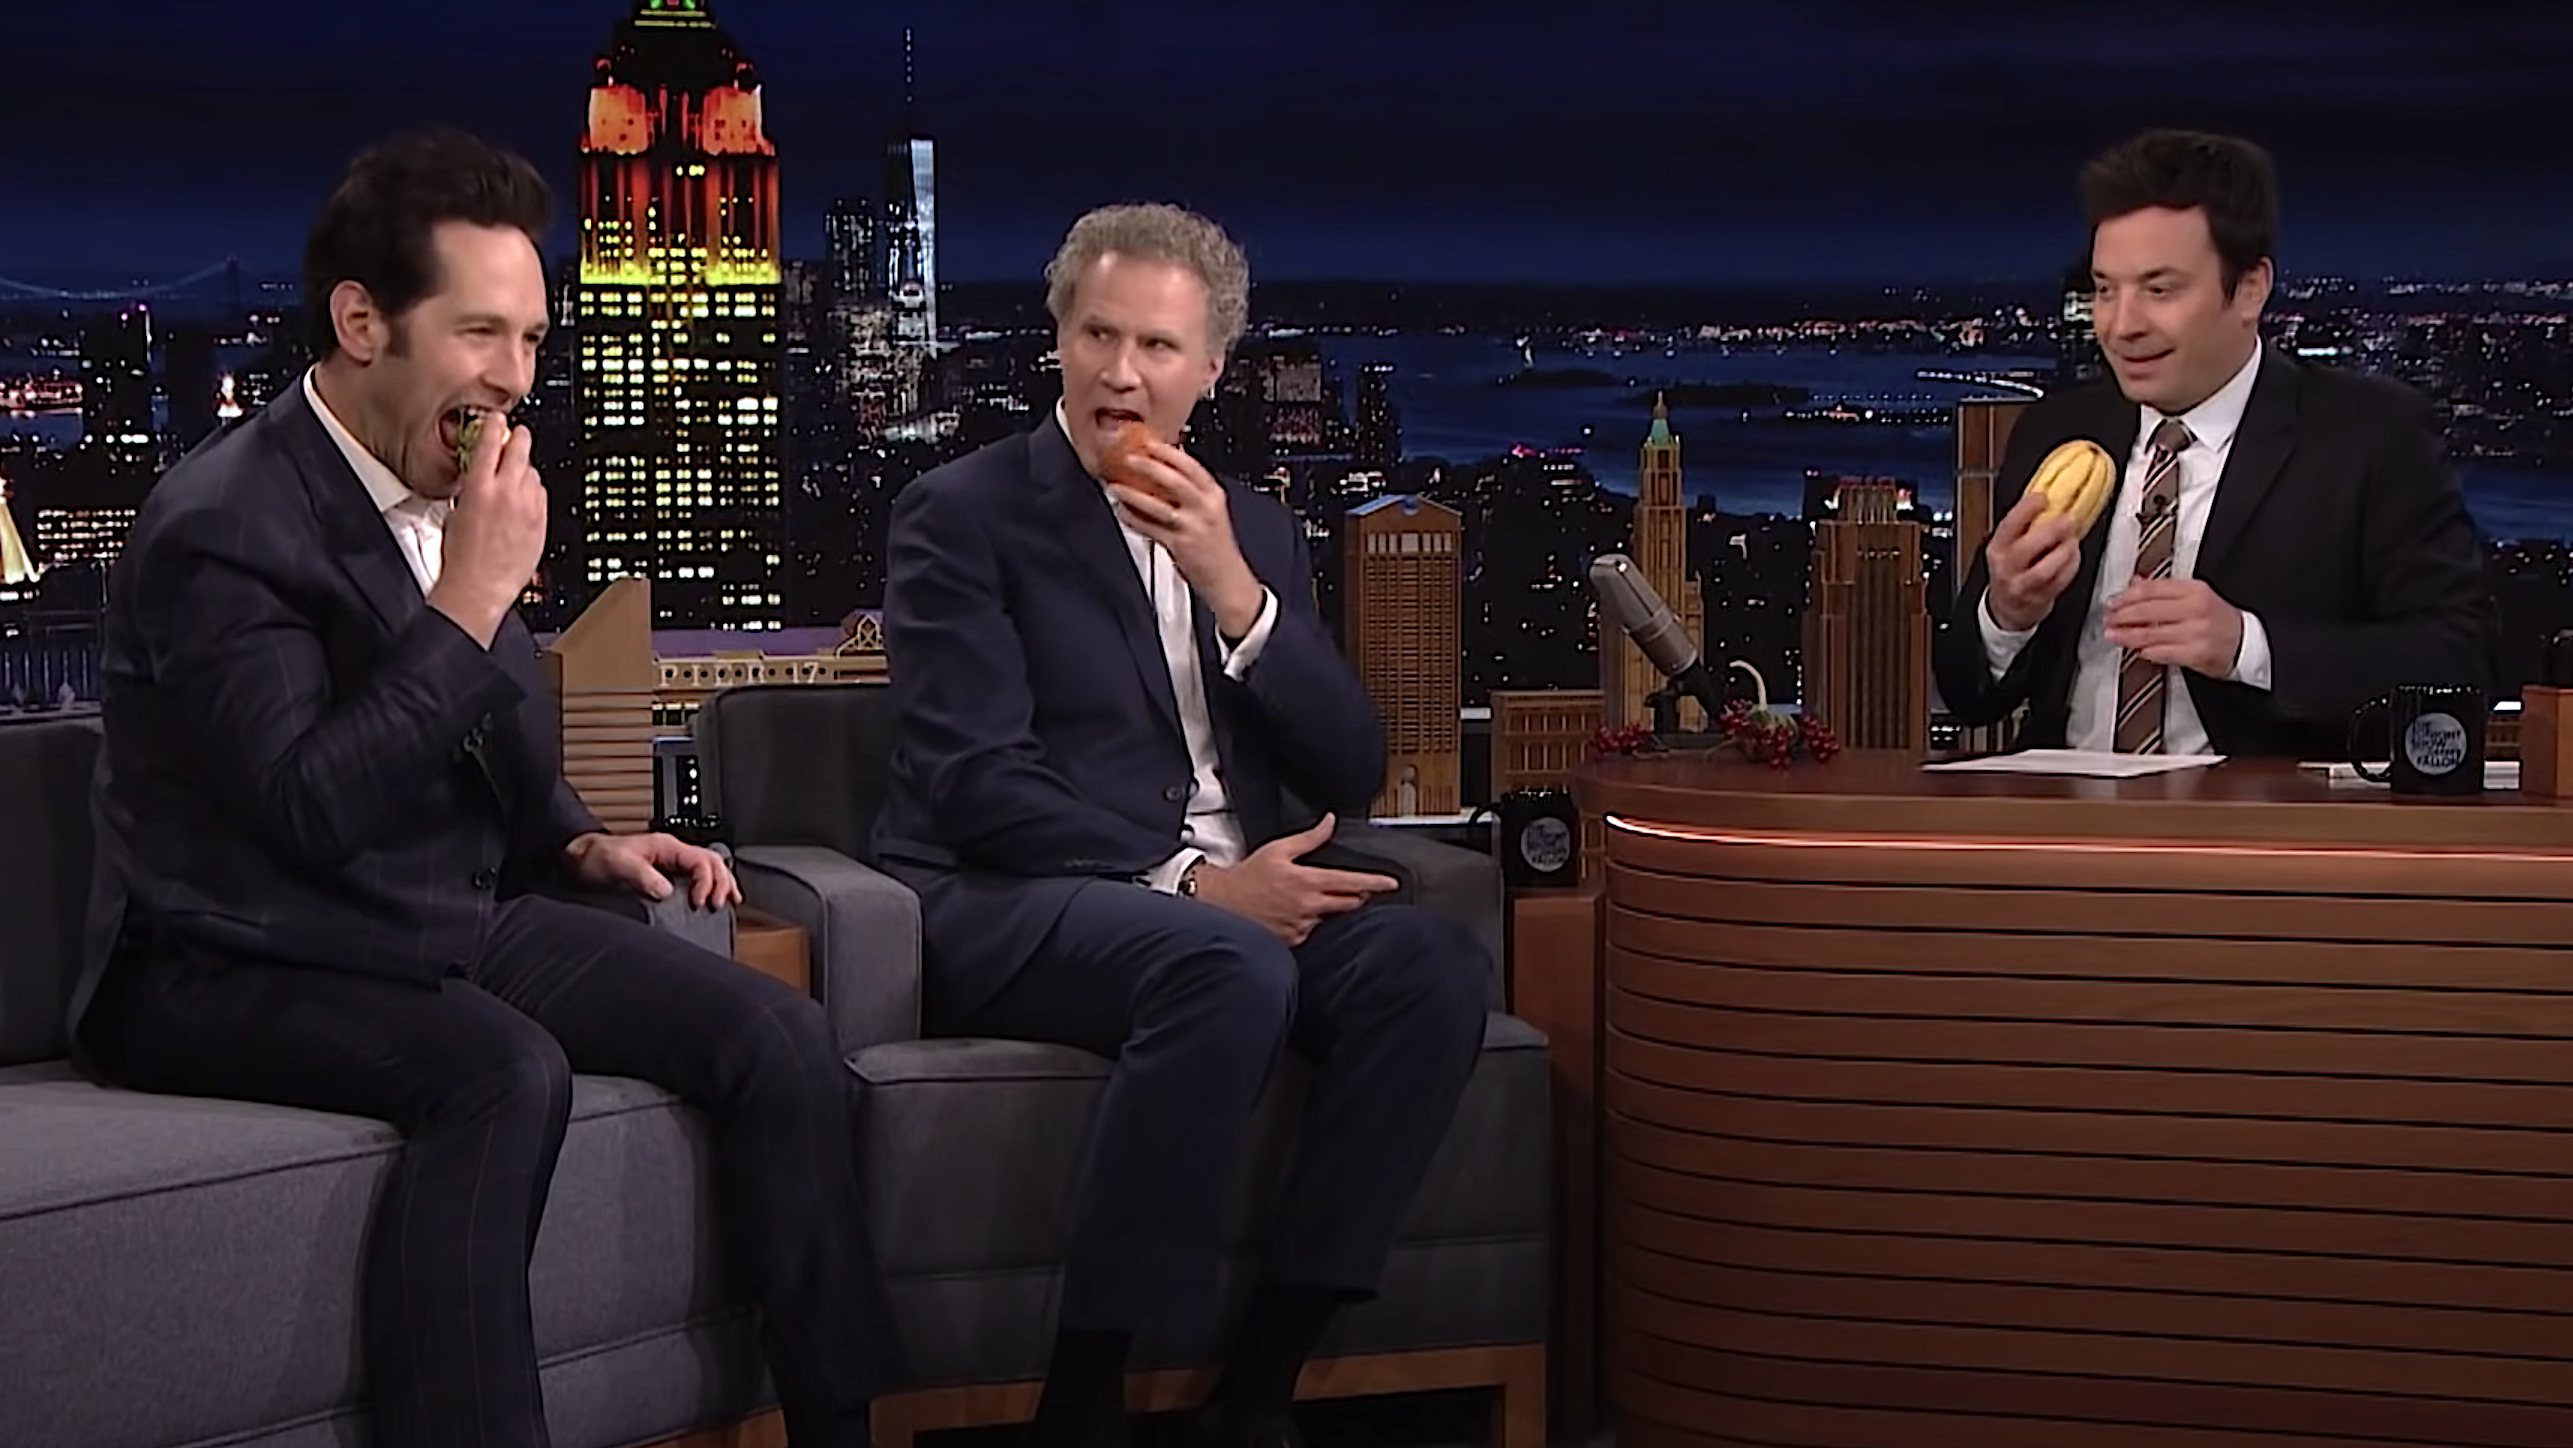 Paul Rudd and Will Ferrell celebrate not-Thanksgiving by eating Jimmy Fallon’s fake food